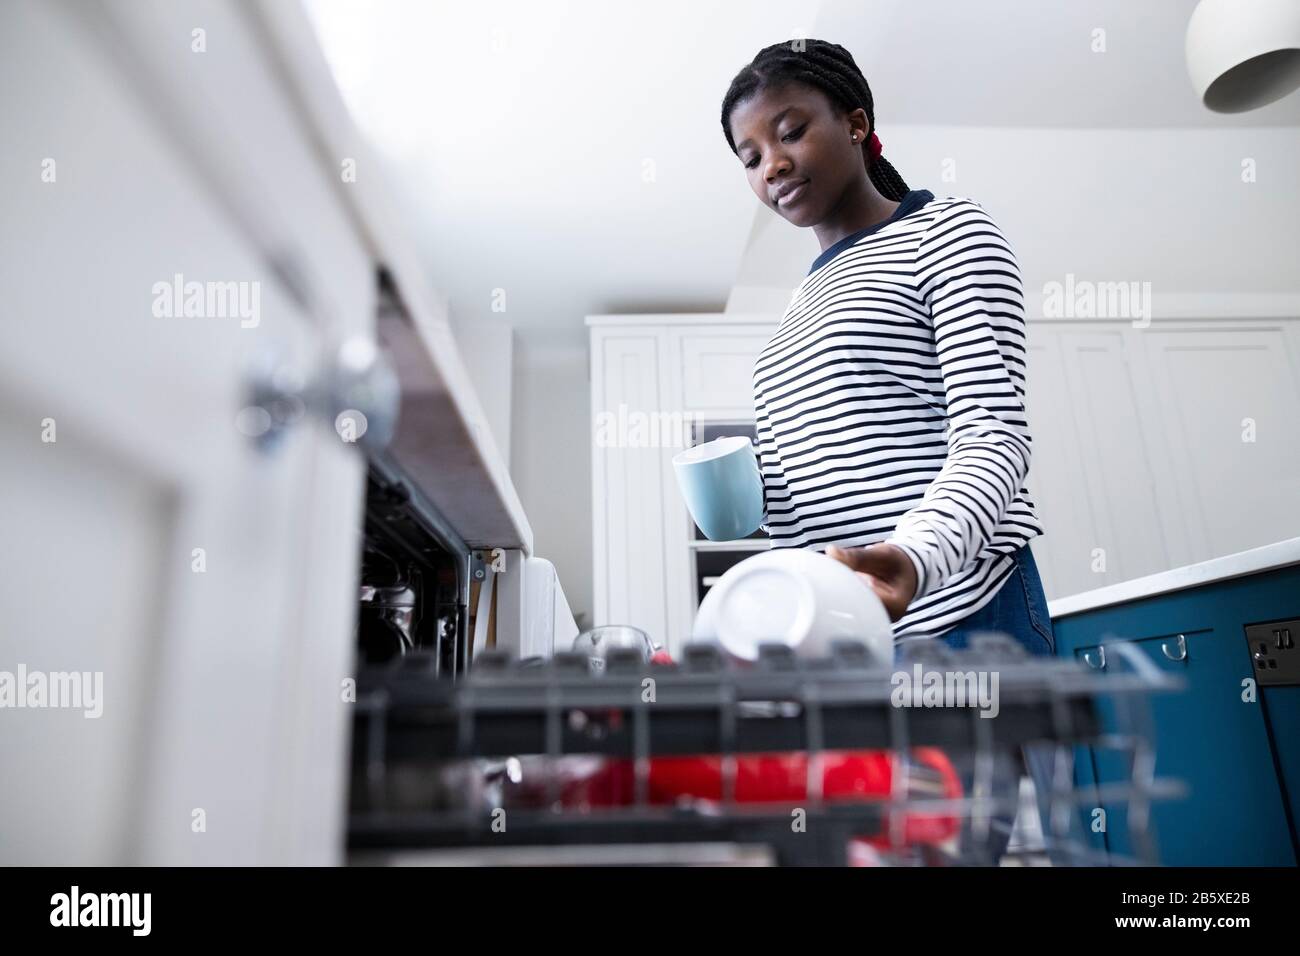 Teenage Girl Boy Helping With Chores At Home By Stacking Crockery In Dishwasher Stock Photo